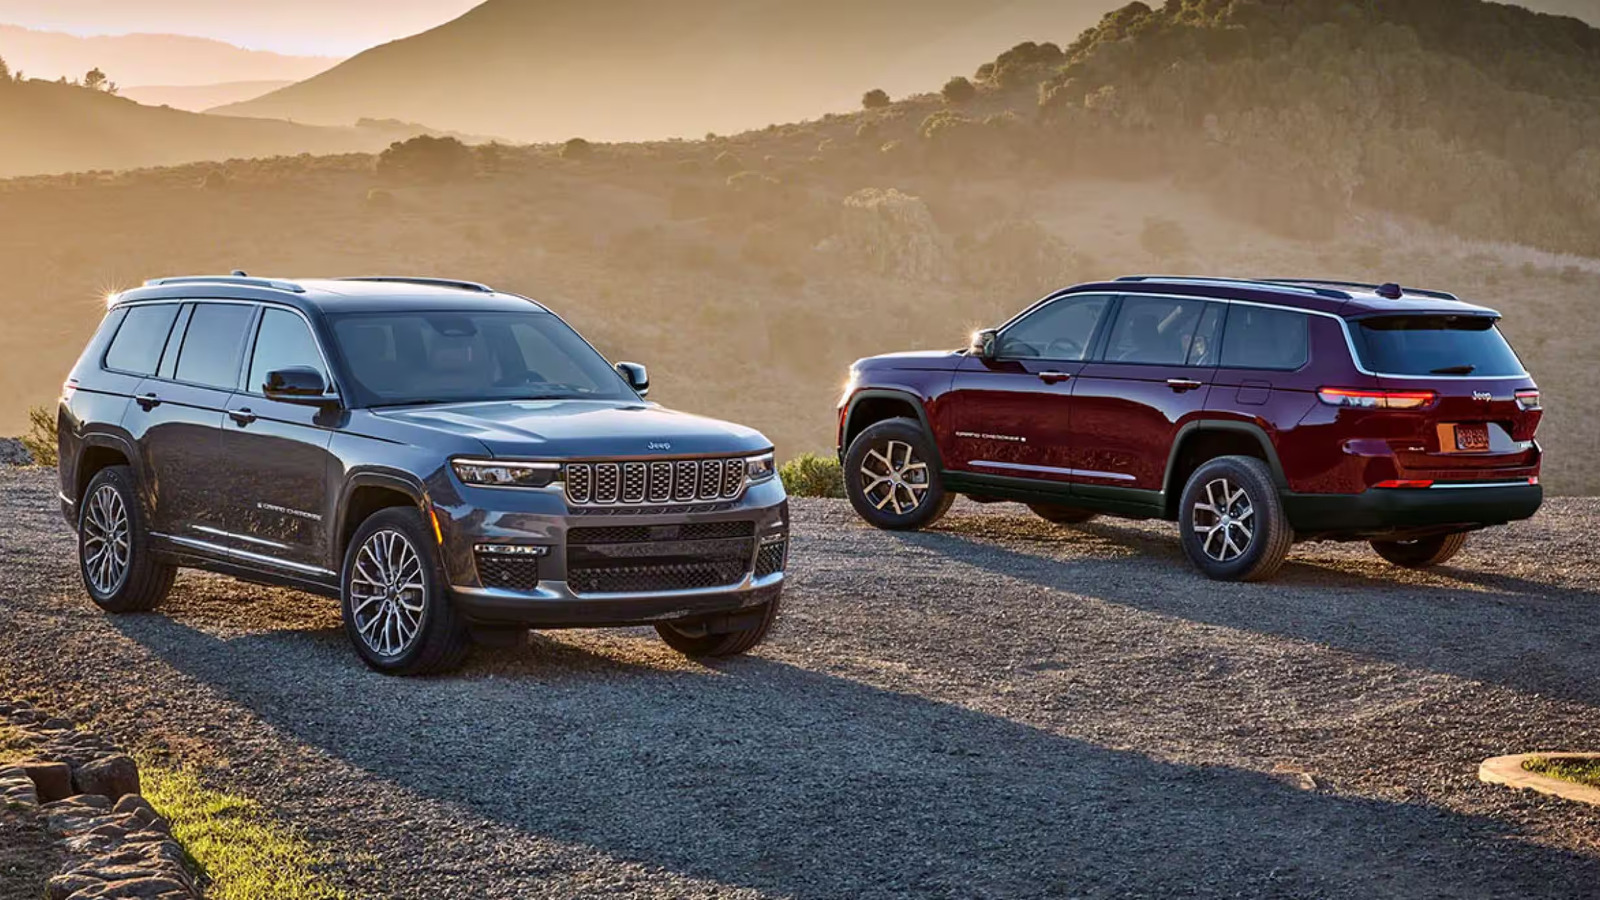 Jeep Grand Cherokee Summit Vs. Altitude: What's The Difference?